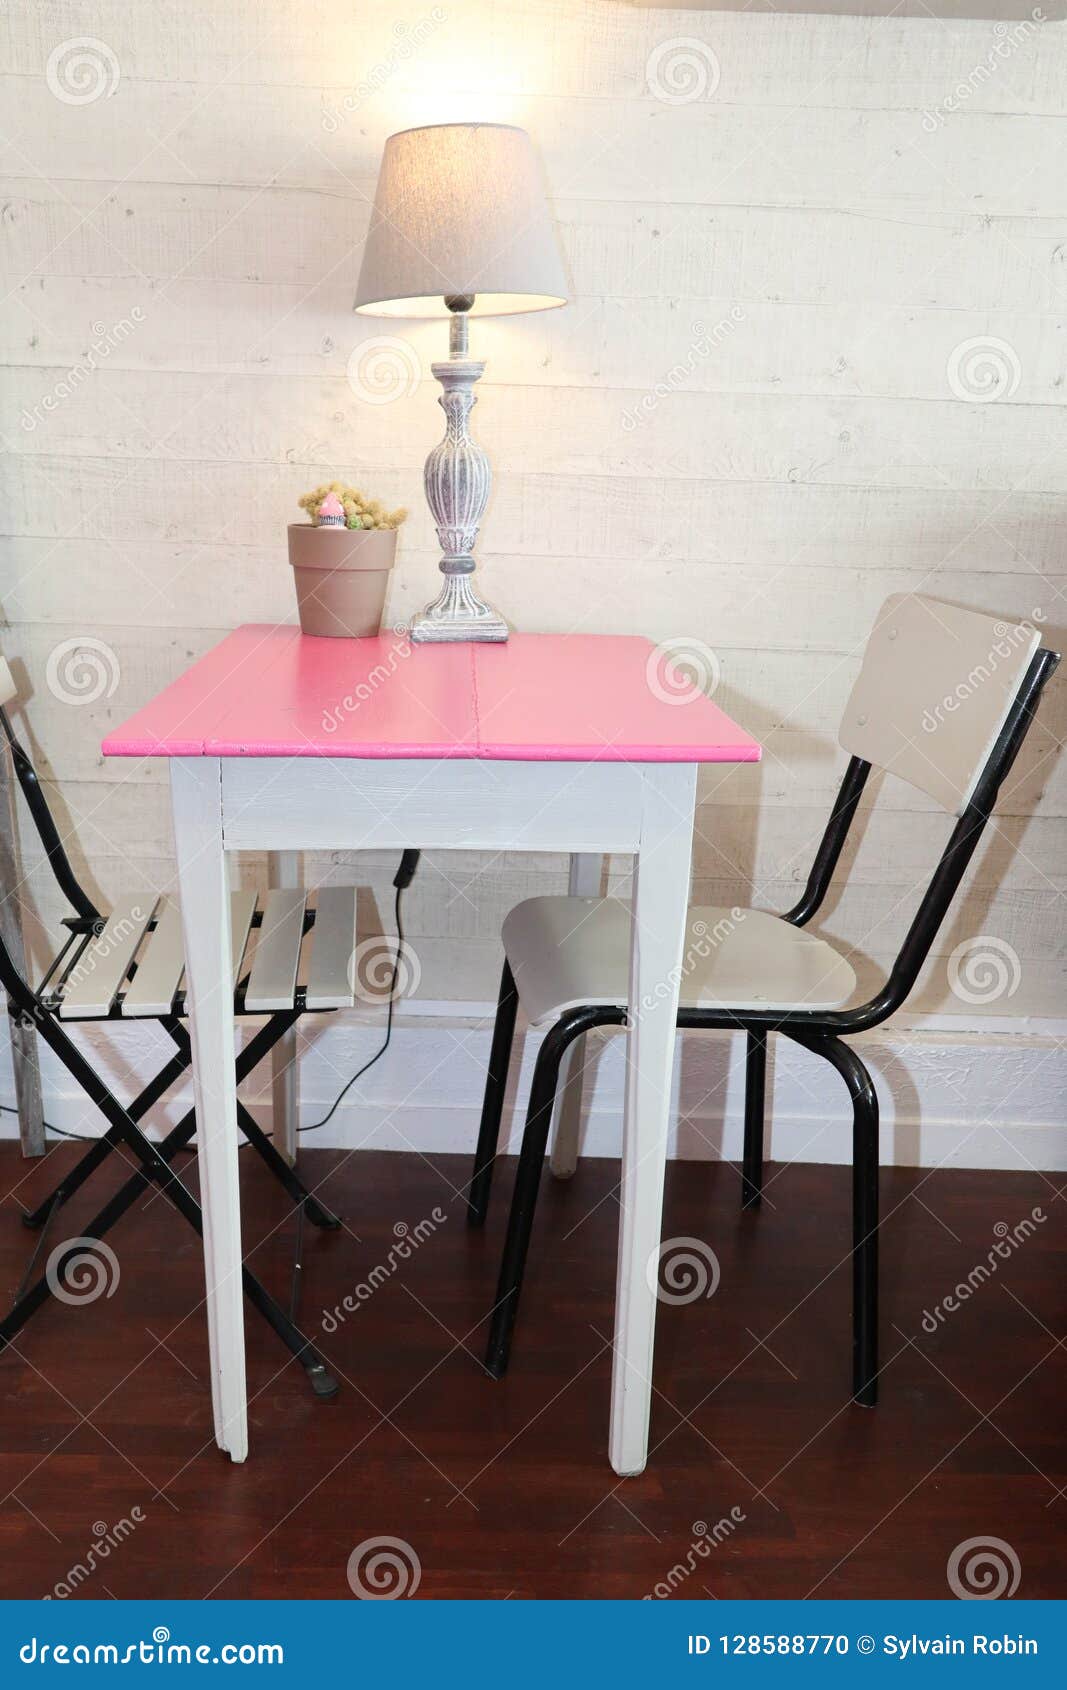 Kitchen Table And Two Chairs In A Minimalist Concept Stock Photo